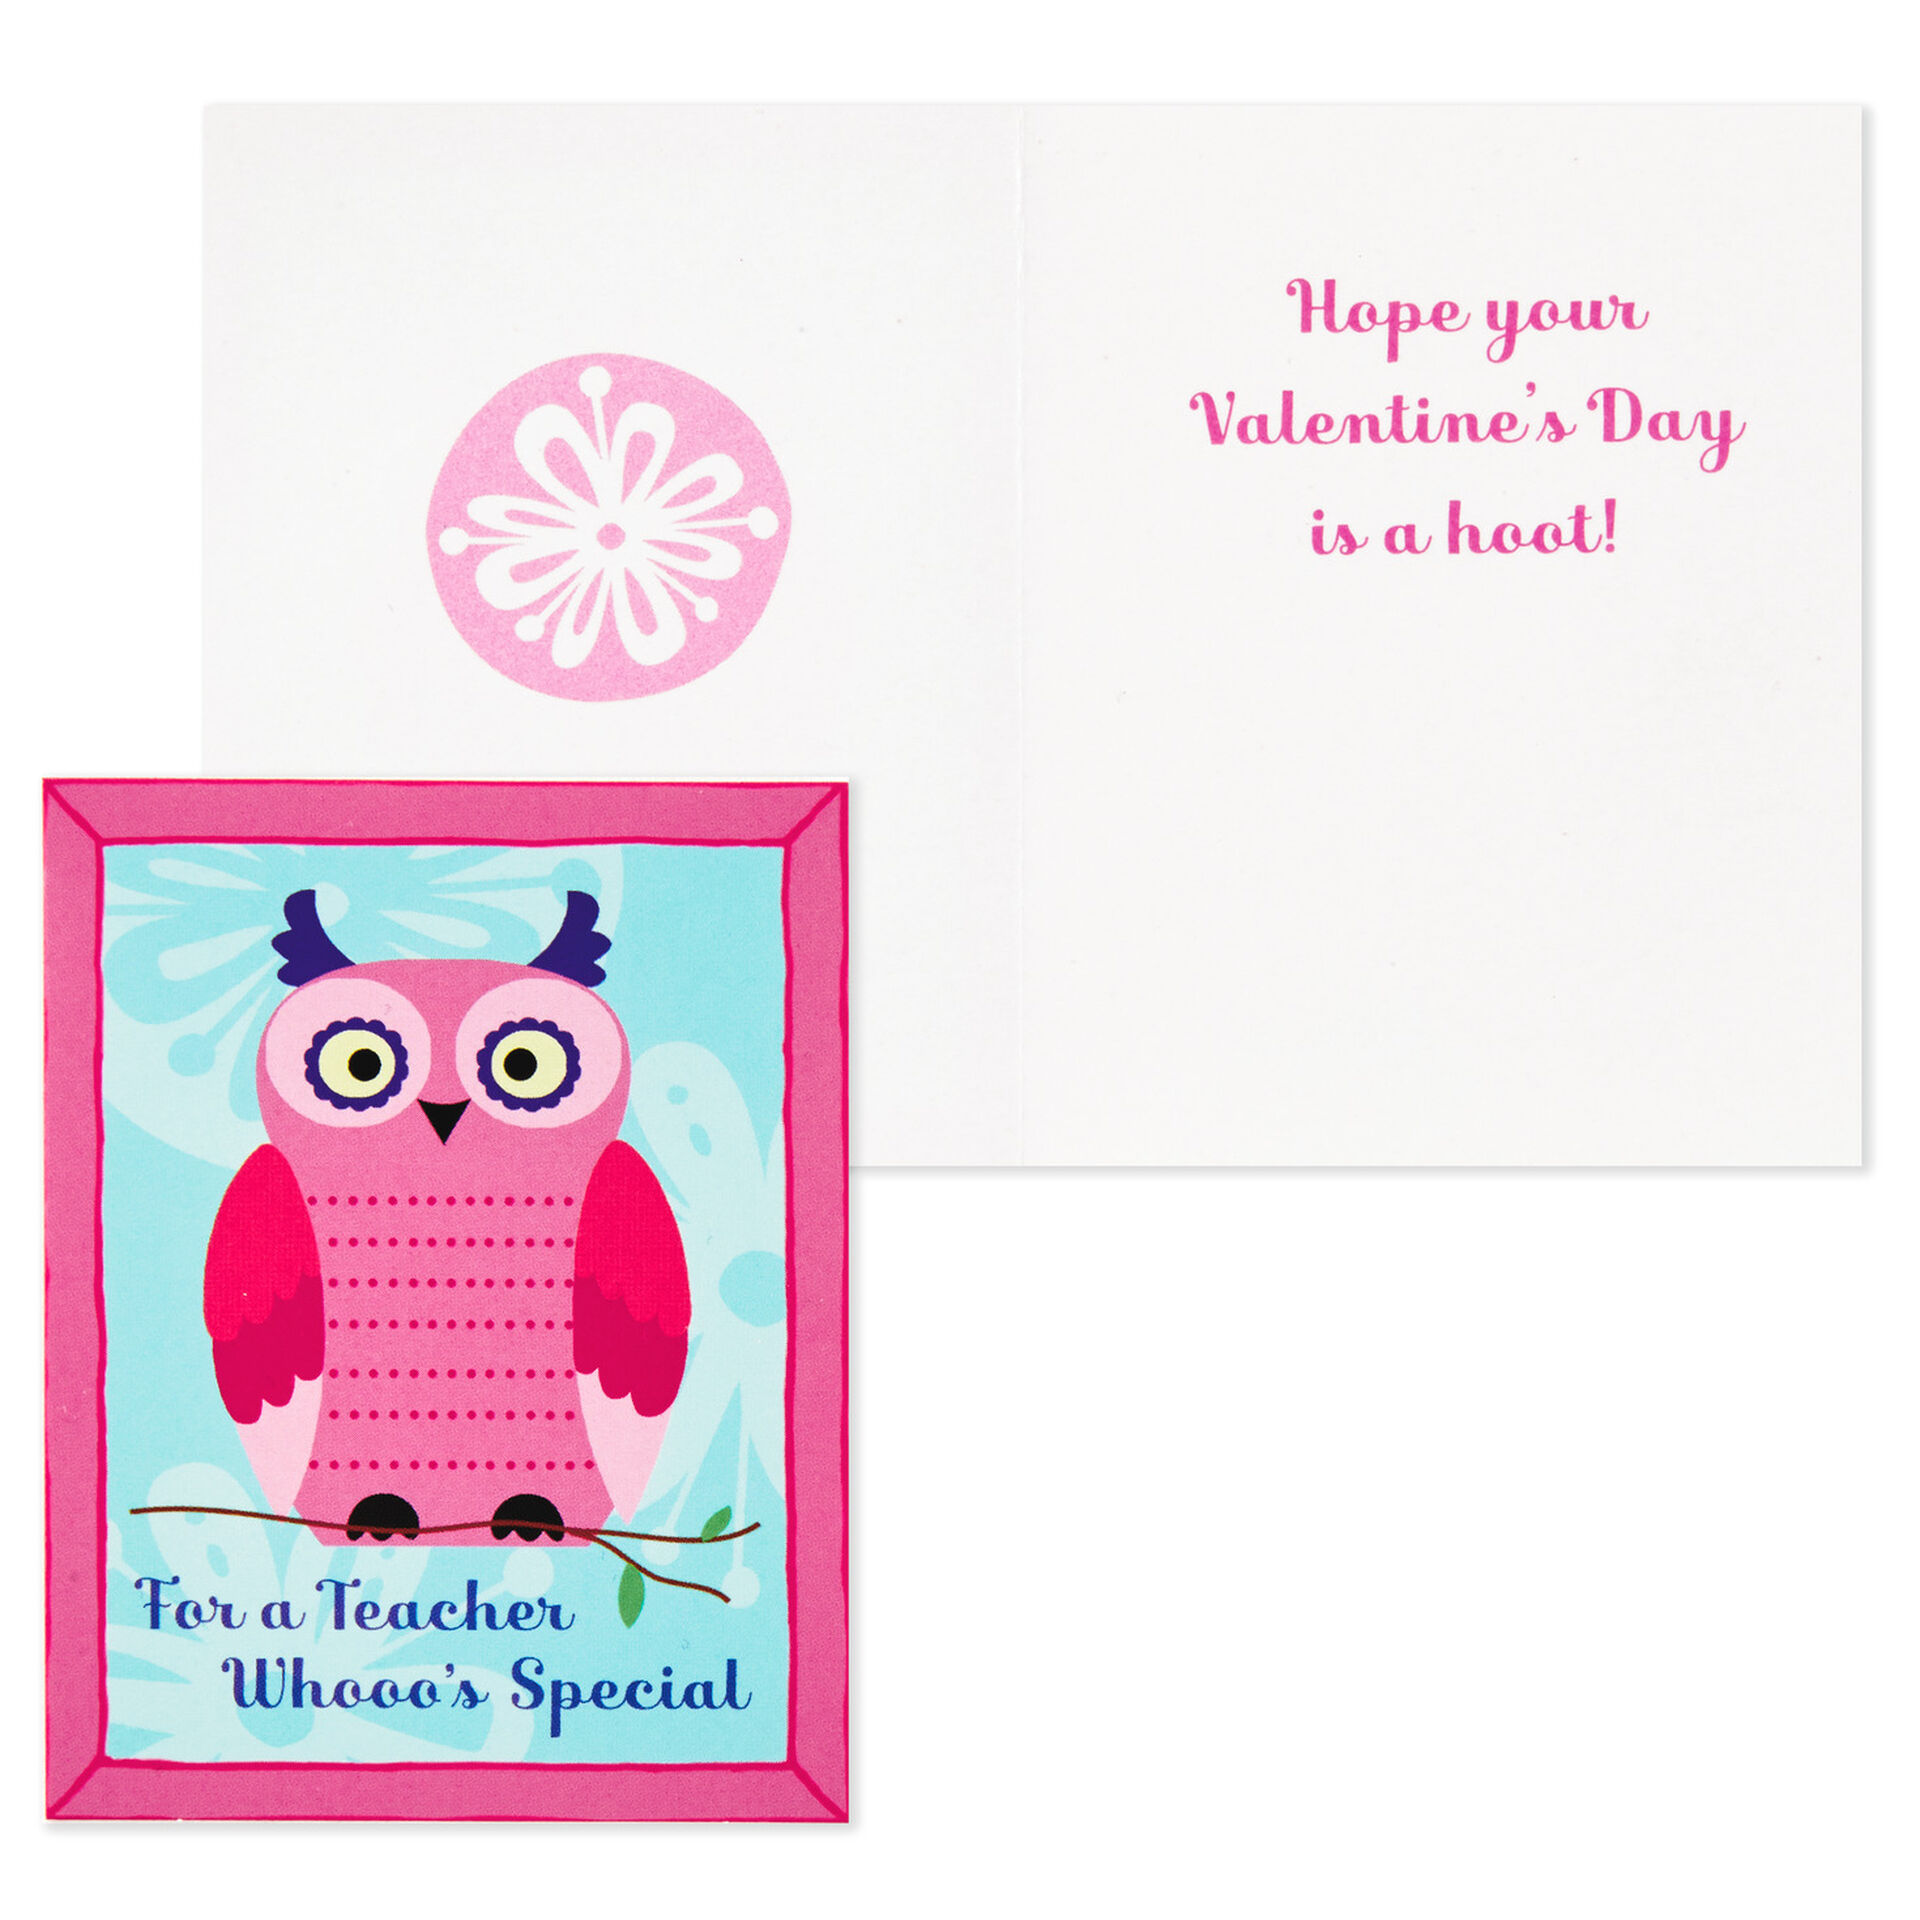 Girly-Icons-Kids-Classroom-Valentines-Stickers-and-Mailbox_5VBX1906_03